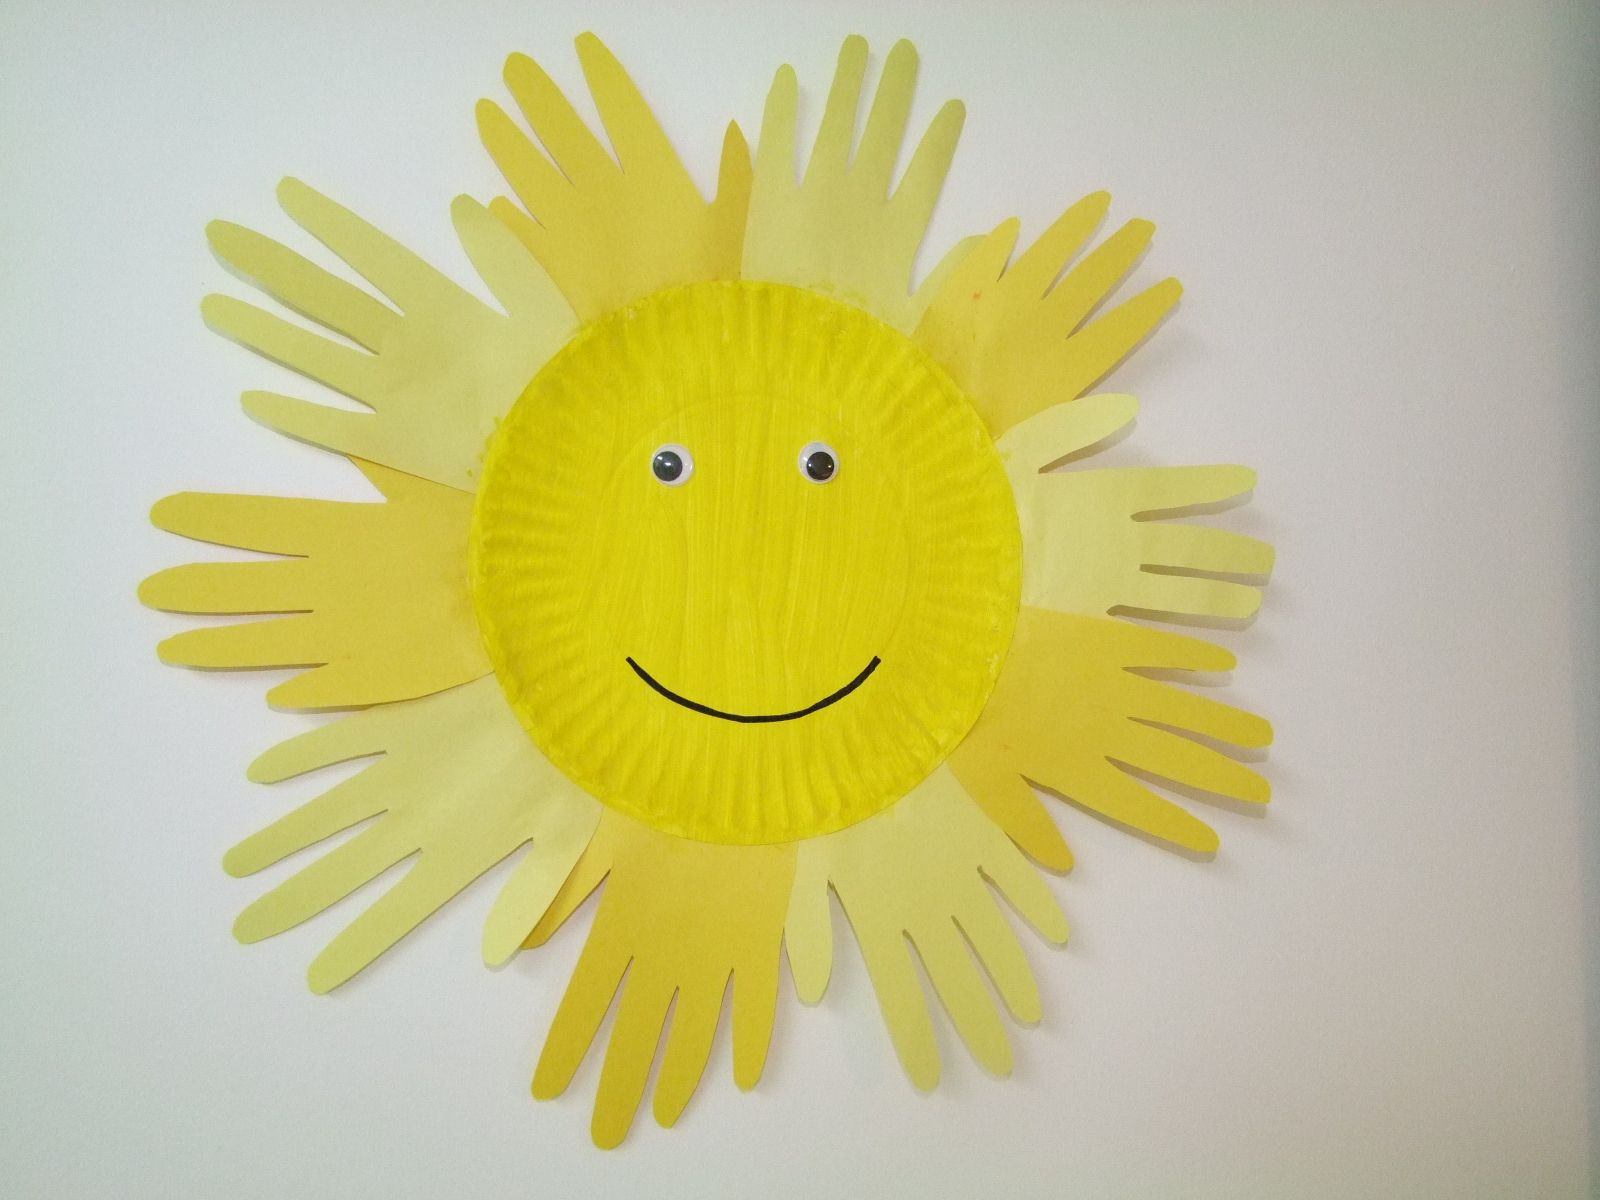 Sun Craft For Preschool
 Pin by Heather Fink on Kids crafts